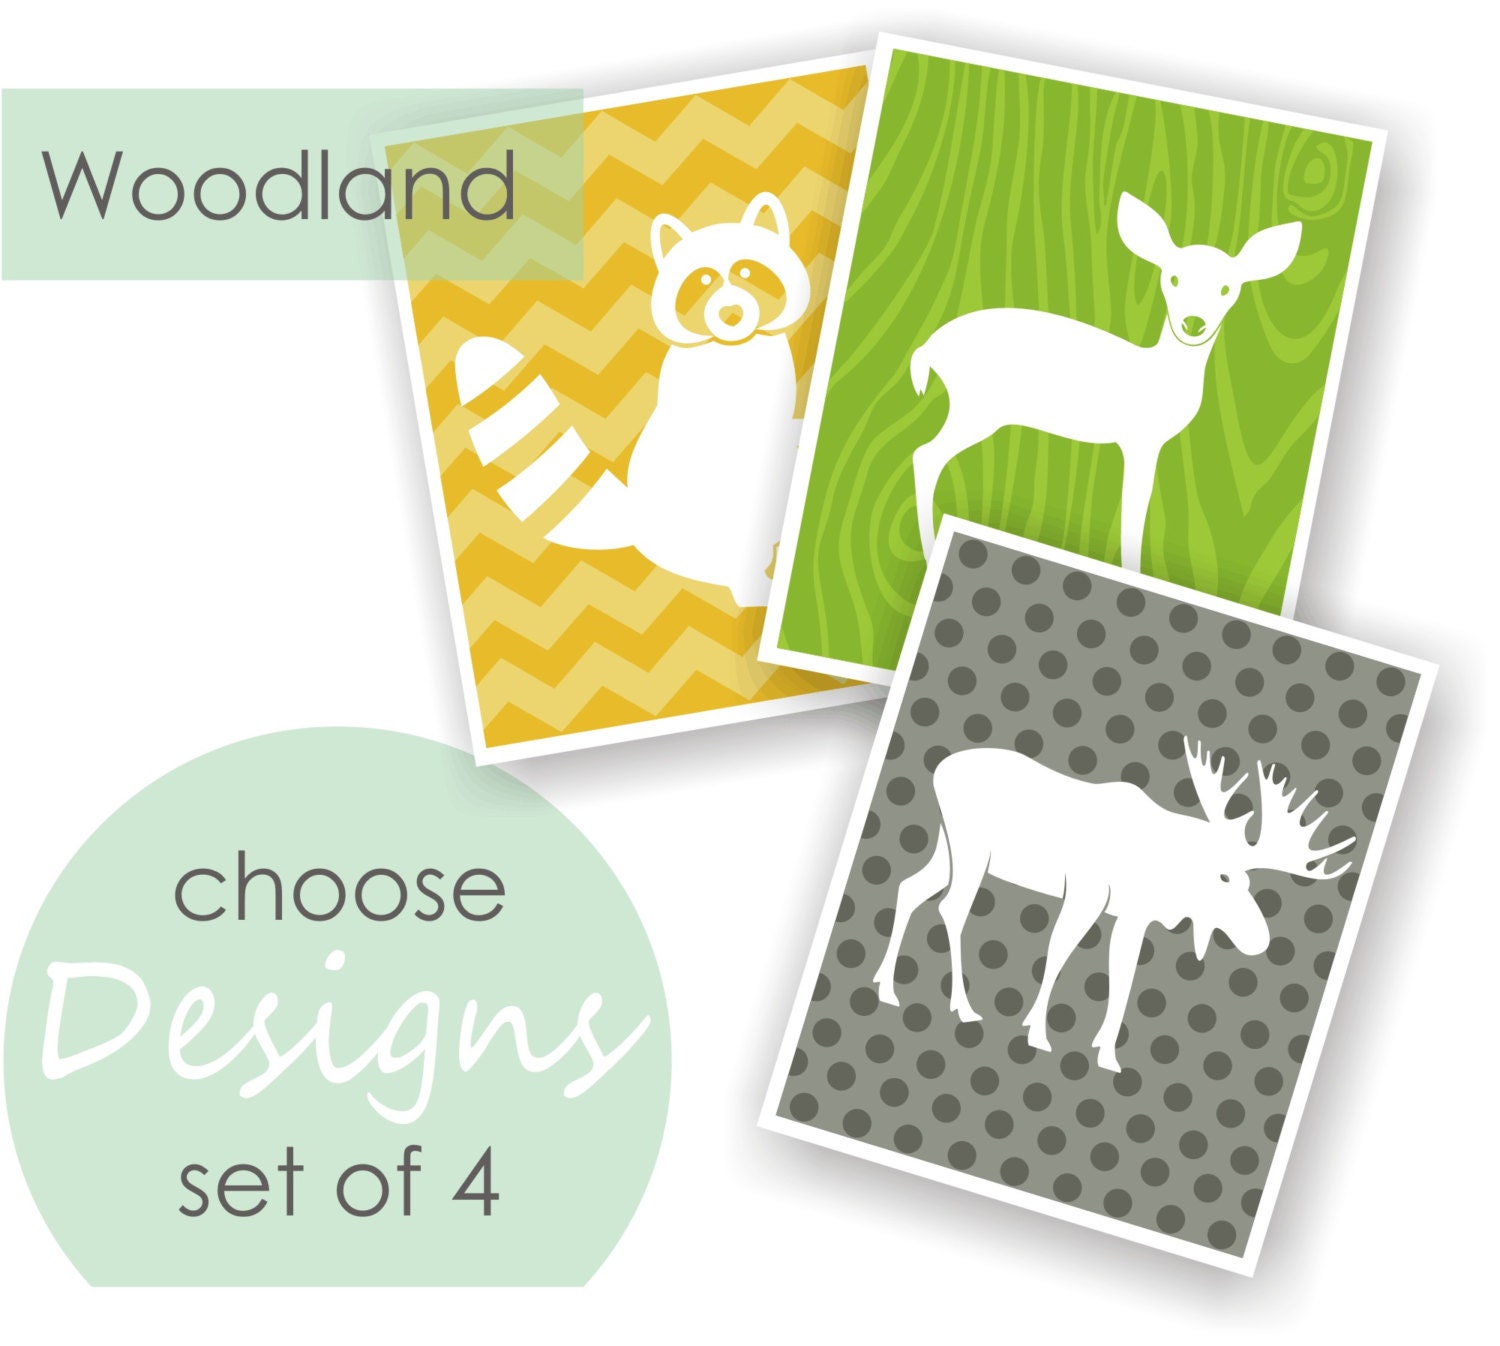 Popular items for woodland forest on Etsy